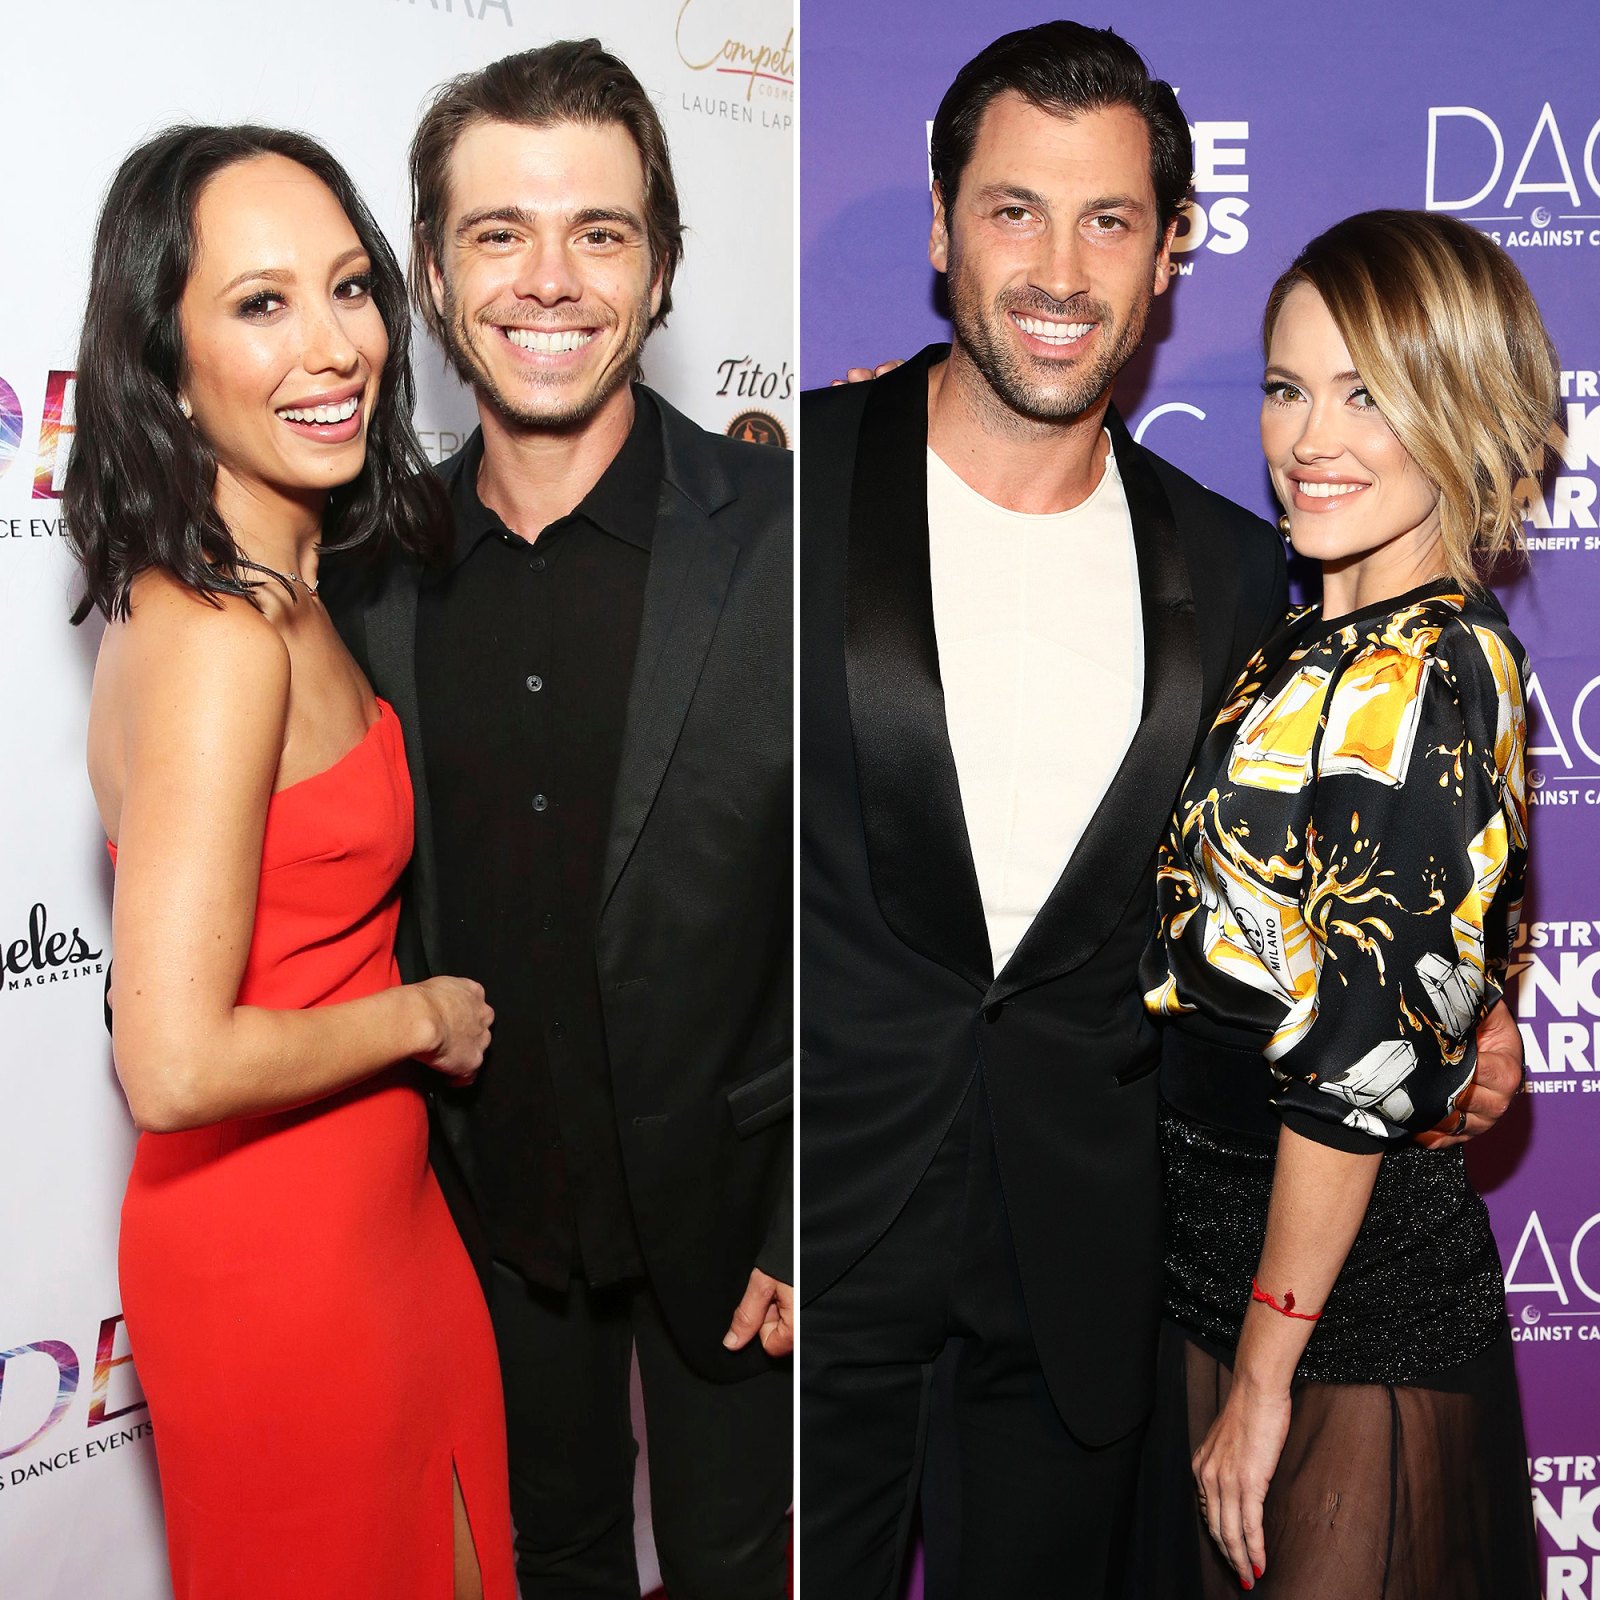 A Guide to All the DWTS Pros and Their Spouses